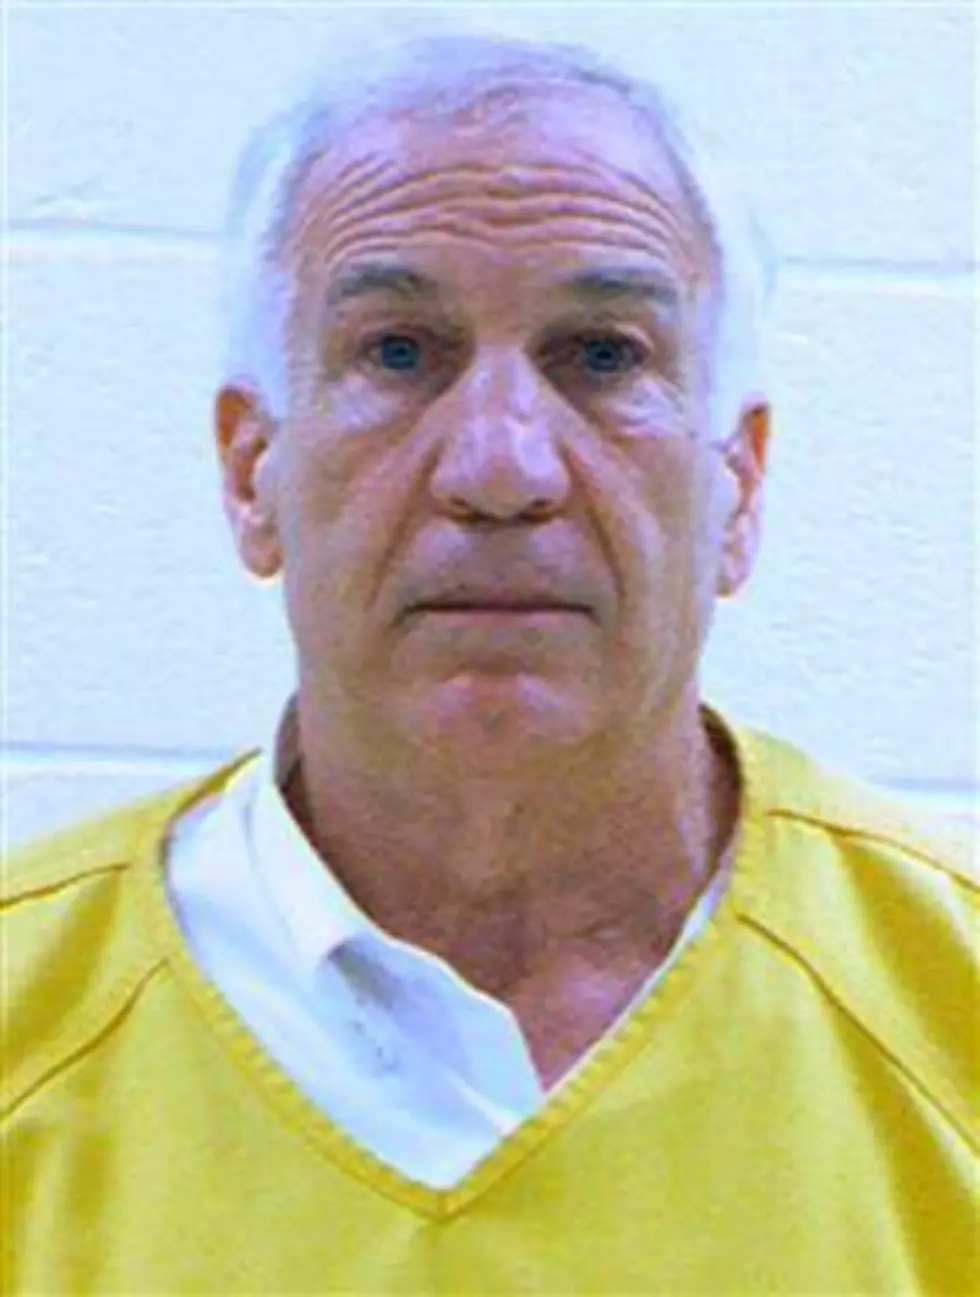 How Much Did Sandusky Trial Cost Taxpayers?